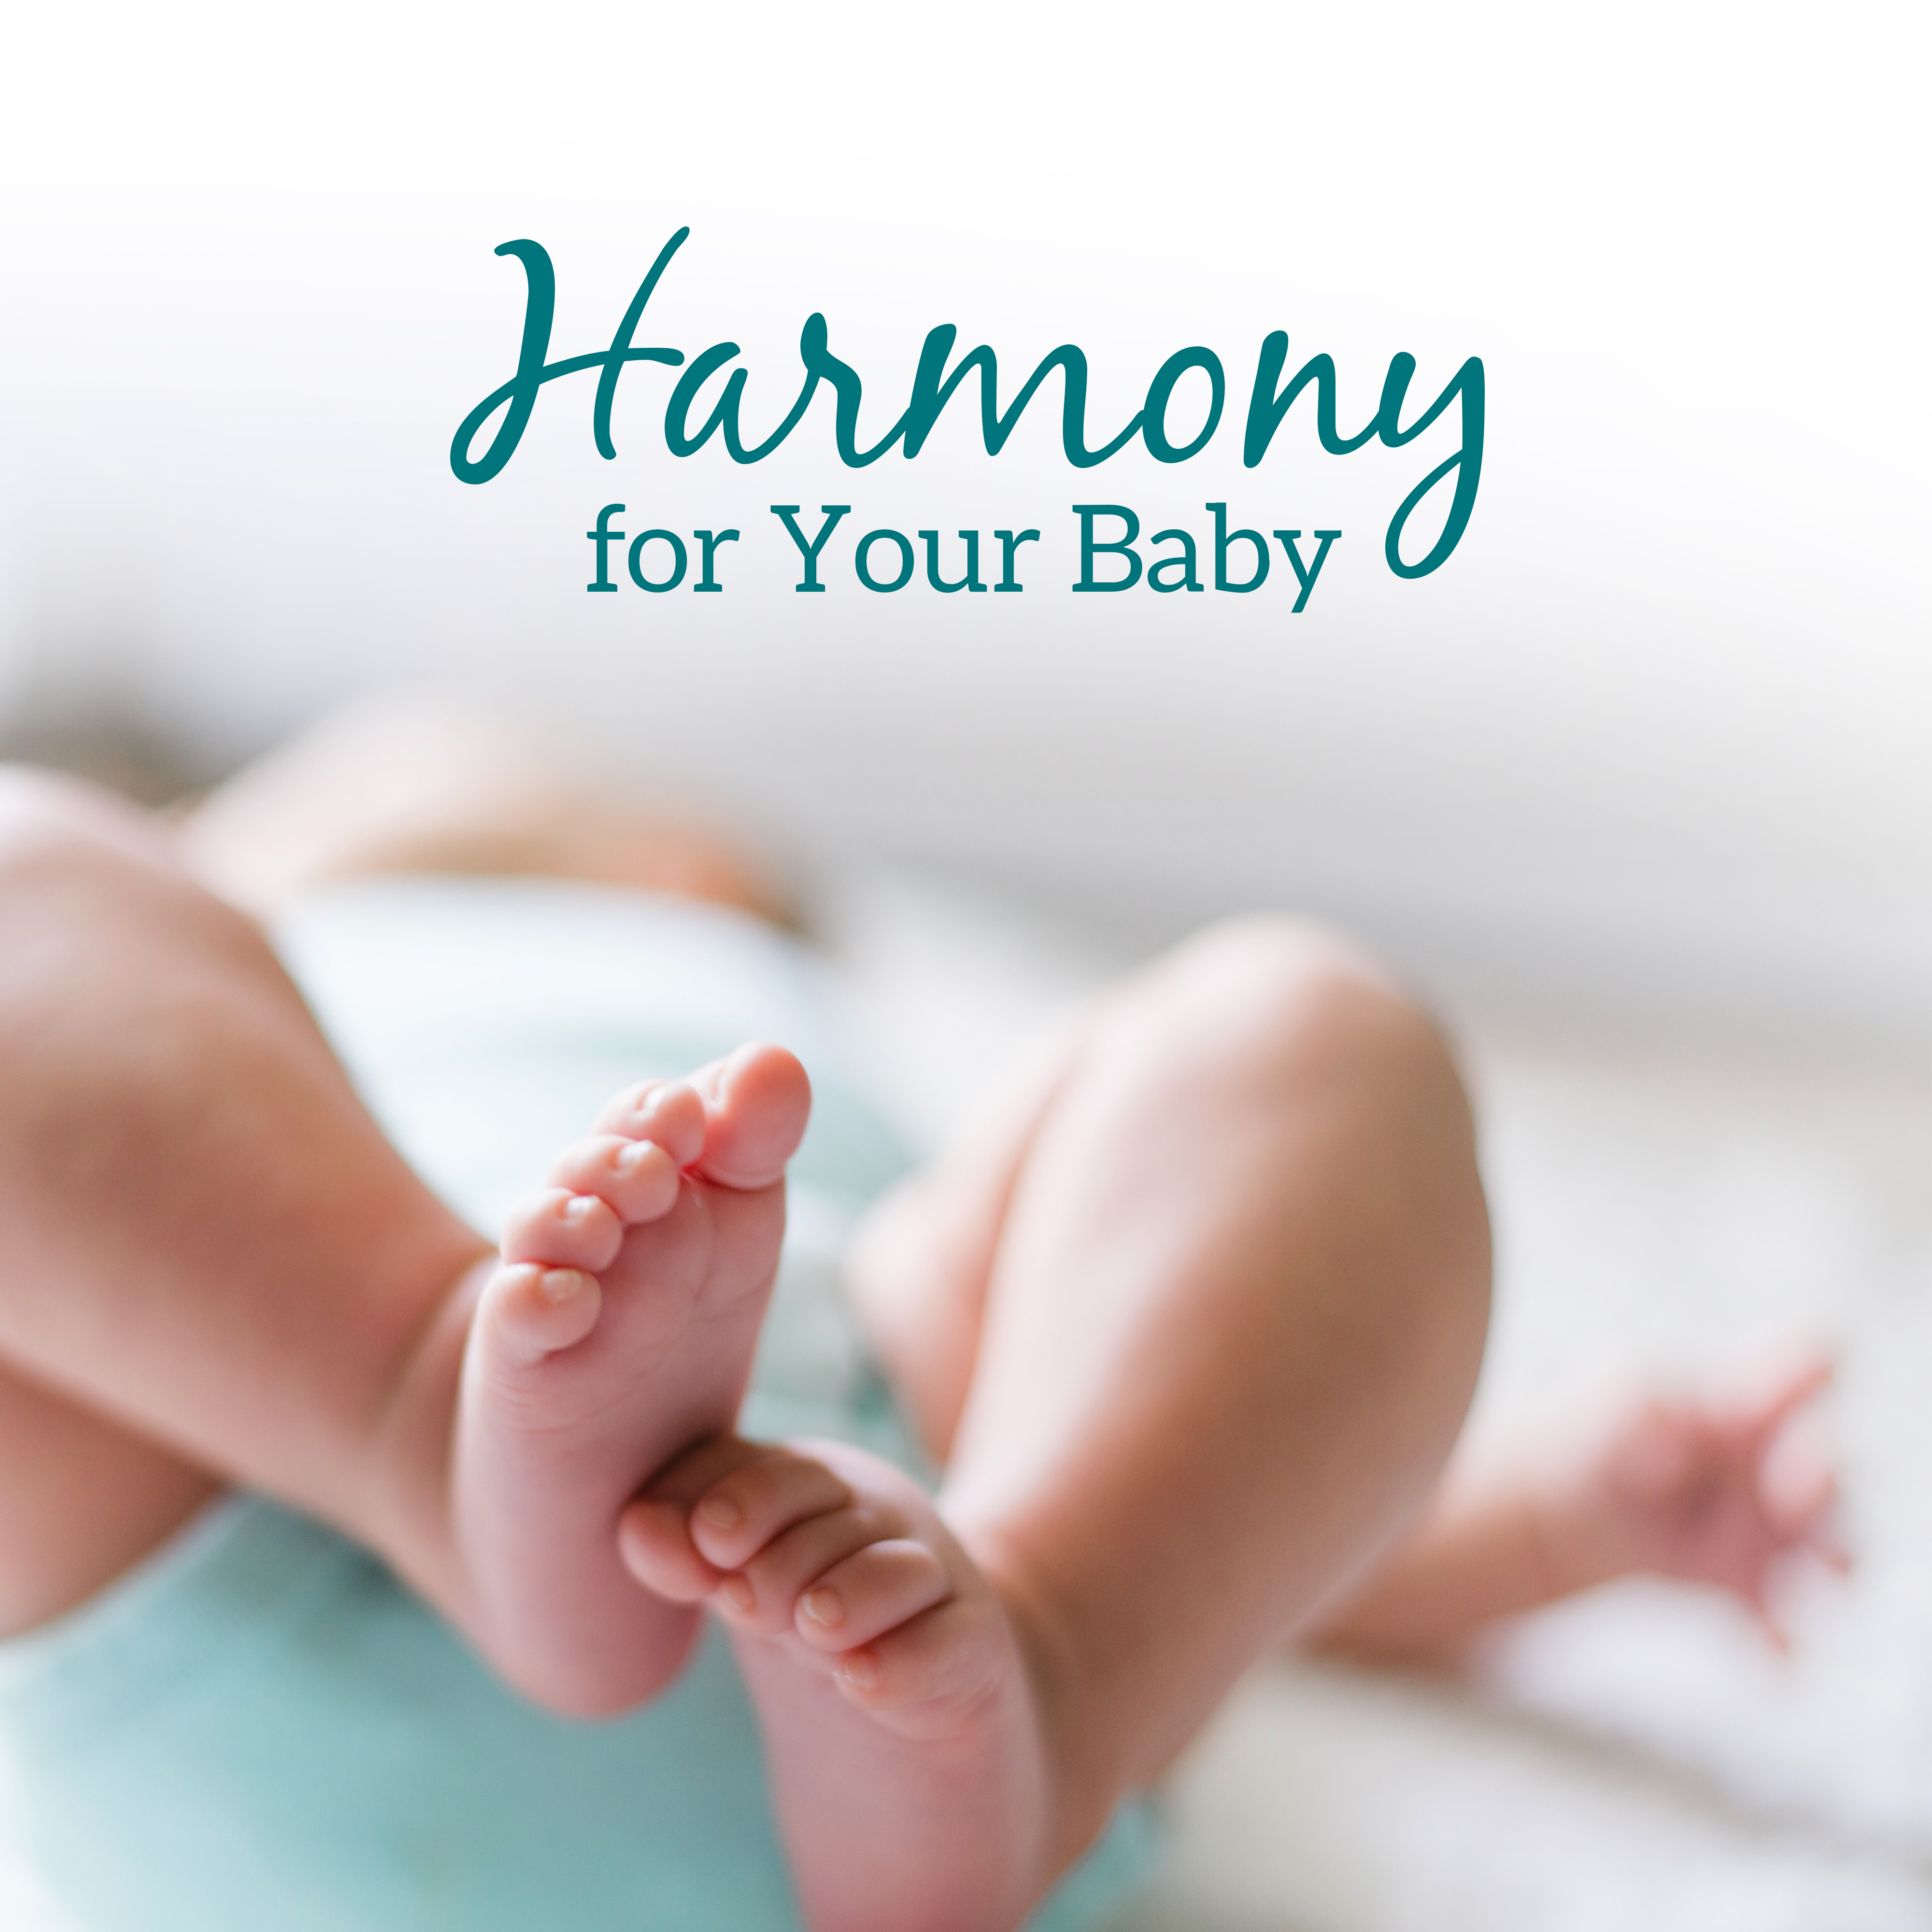 Harmony for Your Baby – Naptime, Soothing Melodies for Sleep, Calm Lullaby, Cradle Songs, Therapy Music